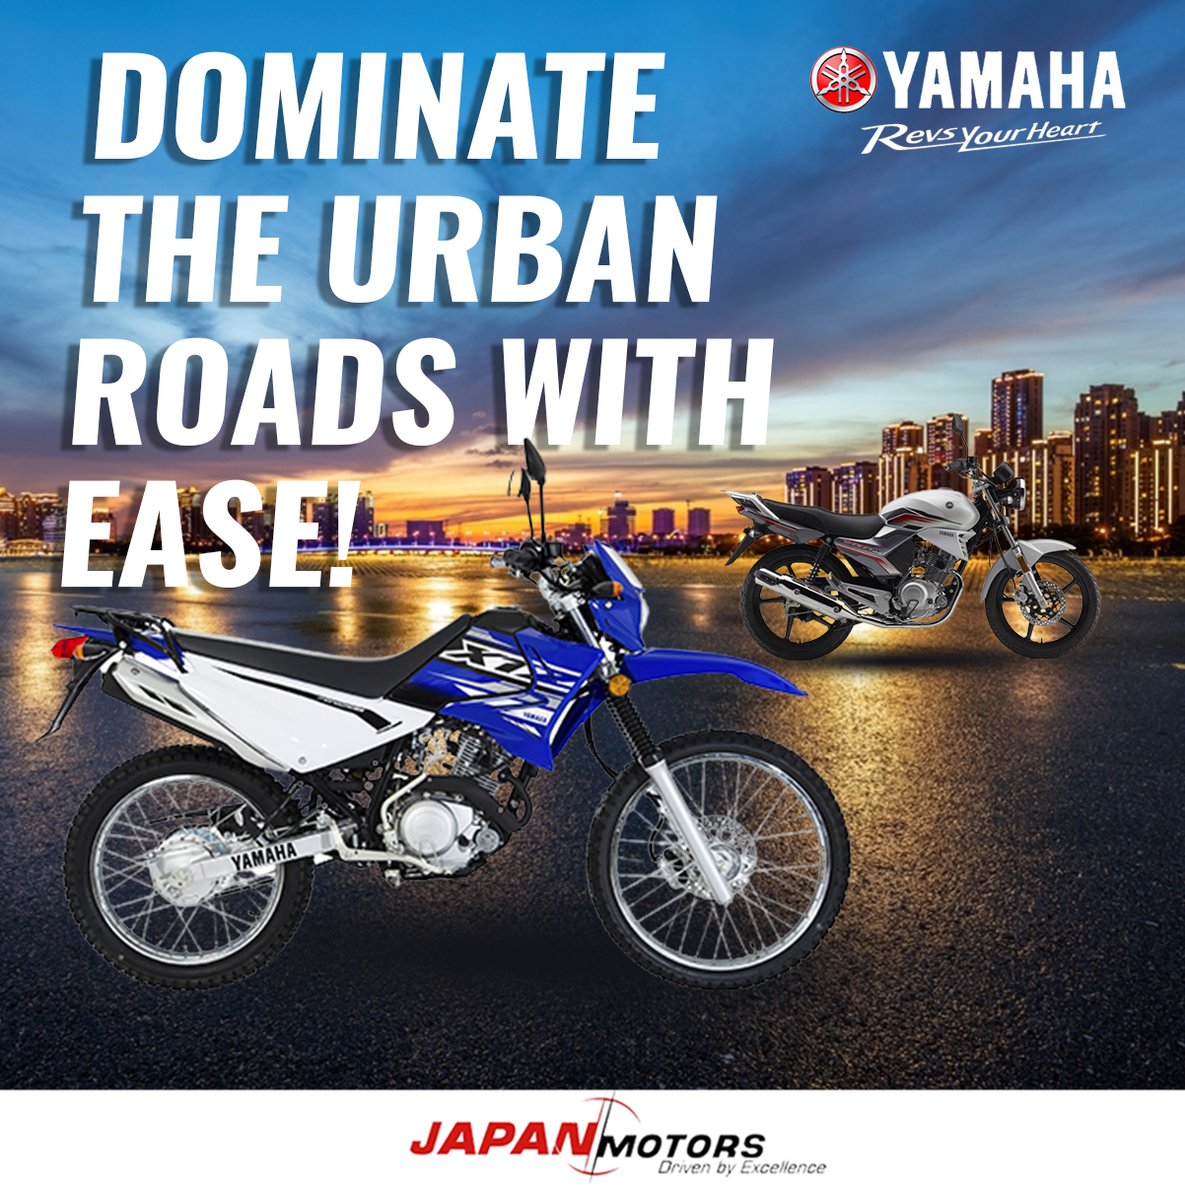 The Yamaha YBR 125E offers a perfect balance of agility and comfort for city commuters

Yamaha Ghana | REQUEST FOR QUOTATION (japanmotors.com)
📞Call our hotline: 0540106574

Yamaha Revs Your Heart.
#YamahaMotorcycle #OffRoadAdventure #RuggedRider #MotorcycleCulture